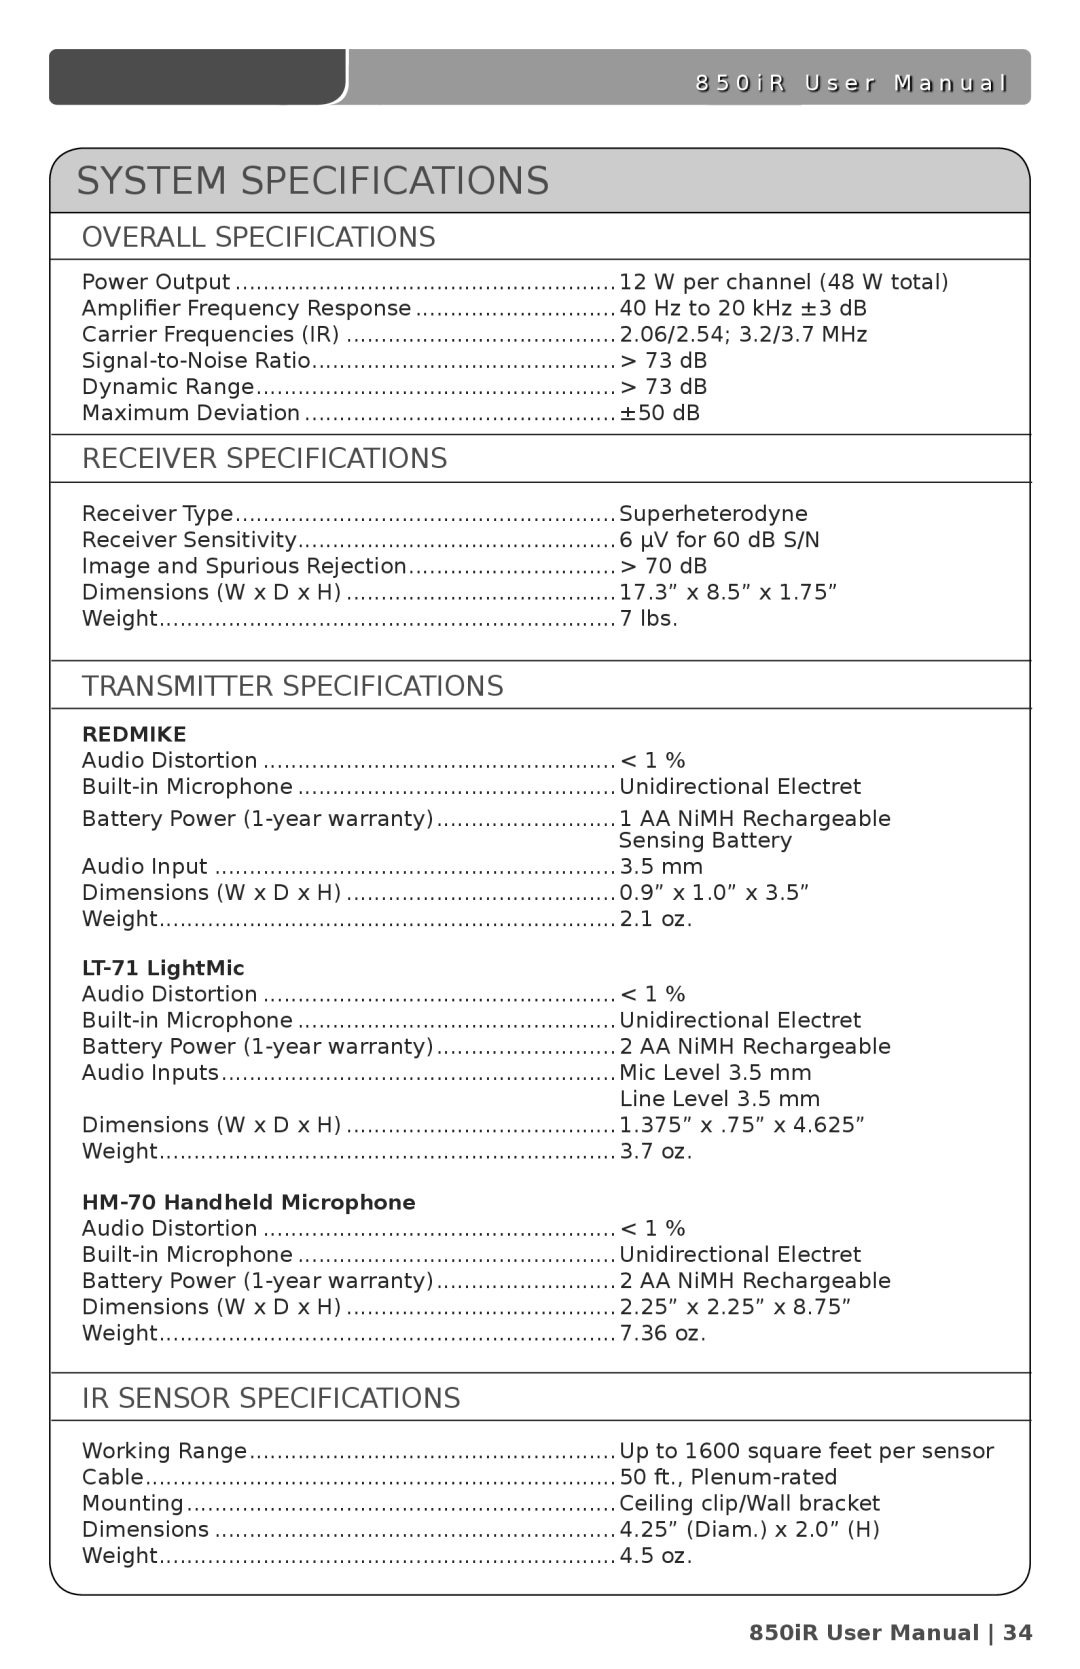 LightSpeed Technologies 850iR user manual System Specifications, Overall Specifications, Receiver Specifications 